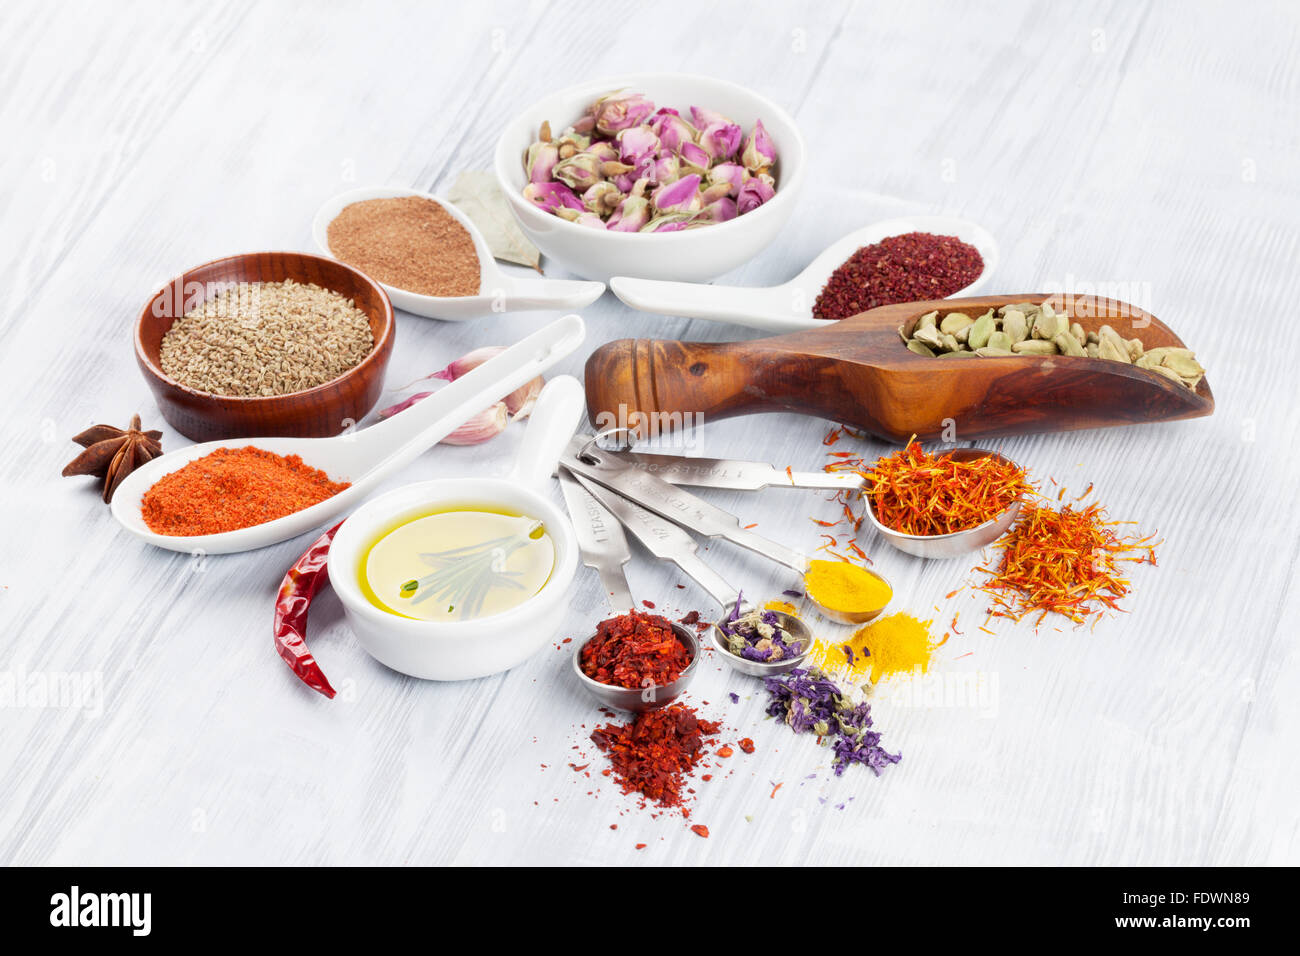 Herbs and spices over white wood background Stock Photo